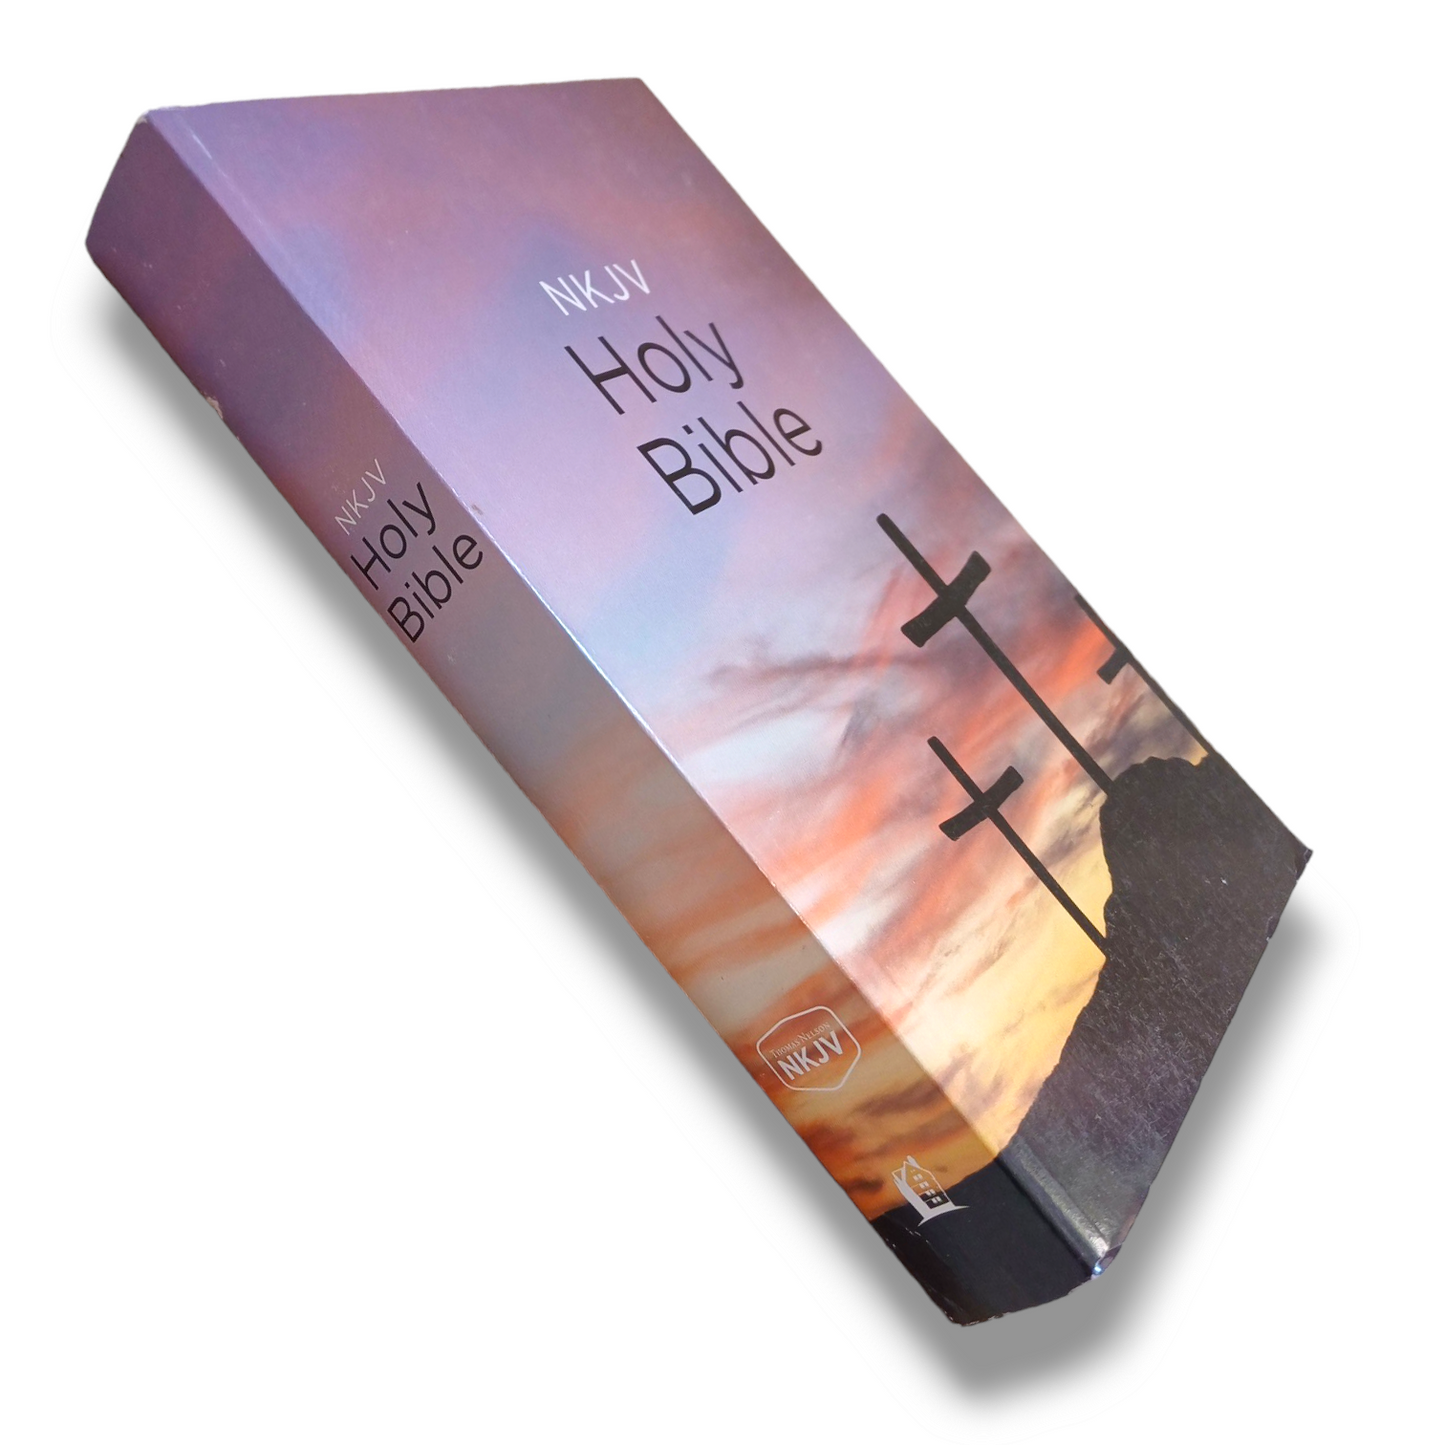 NKJV Value Outreach Bible | Paper Bound Edition | Holy Bible In New King James Version | New Edition